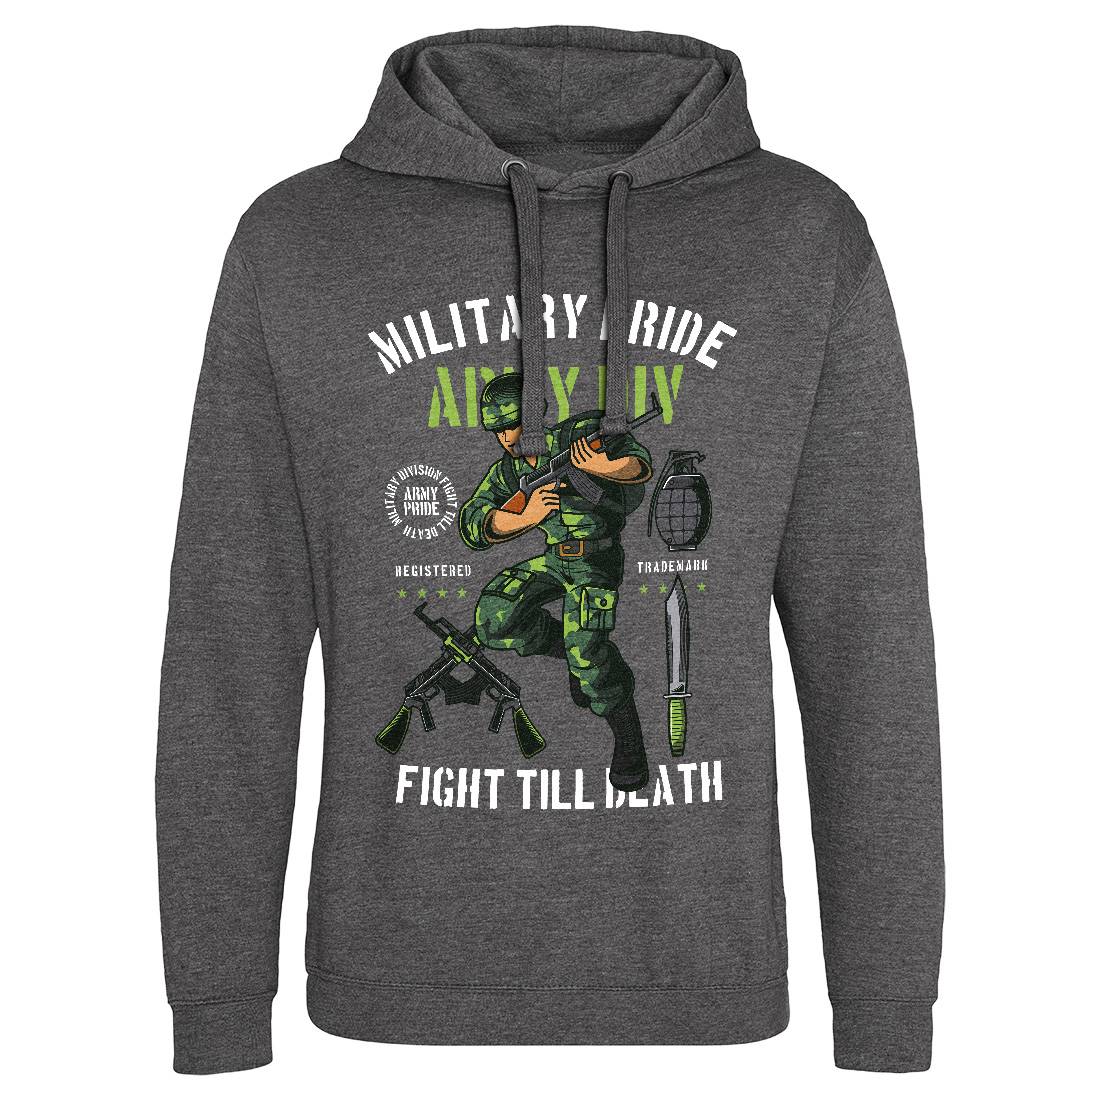 Military Pride Mens Hoodie Without Pocket Army C395